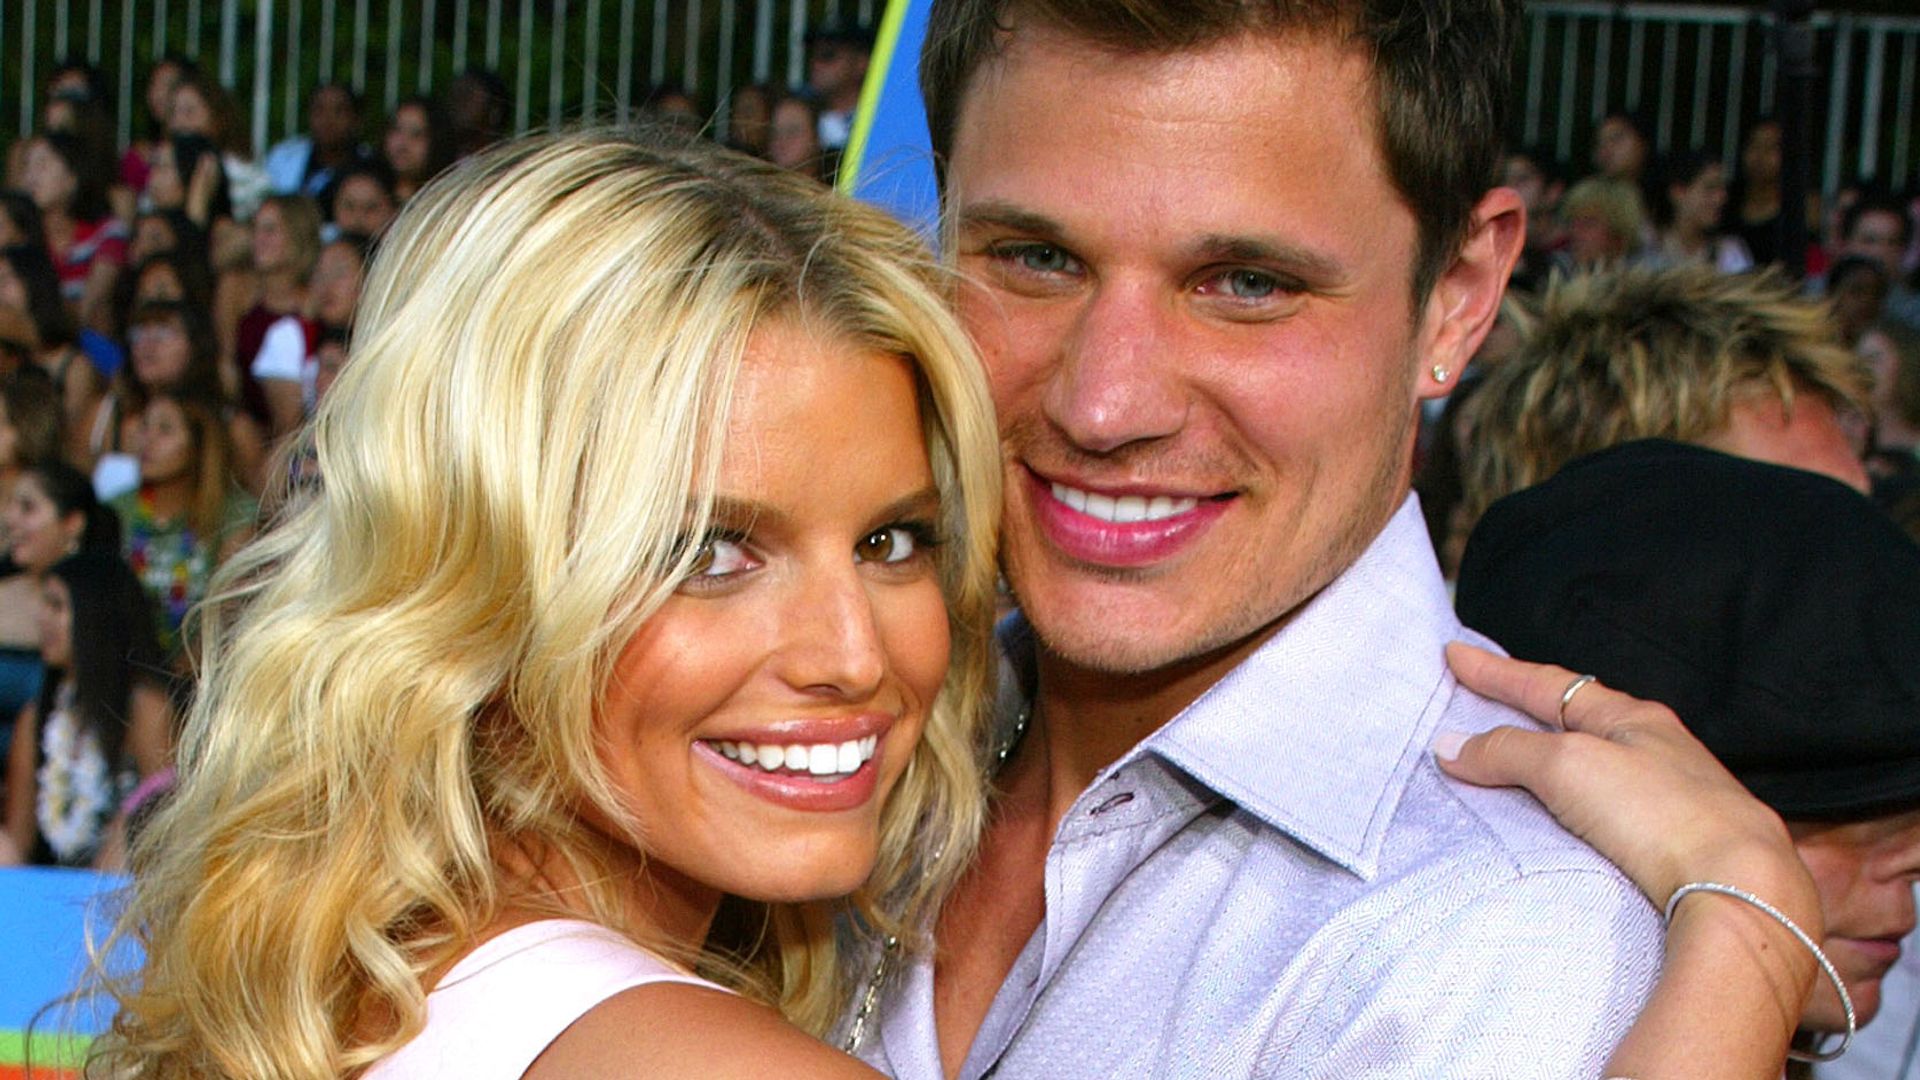 Newlyweds Turns What Have Jessica Simpson And Nick Lachey Said